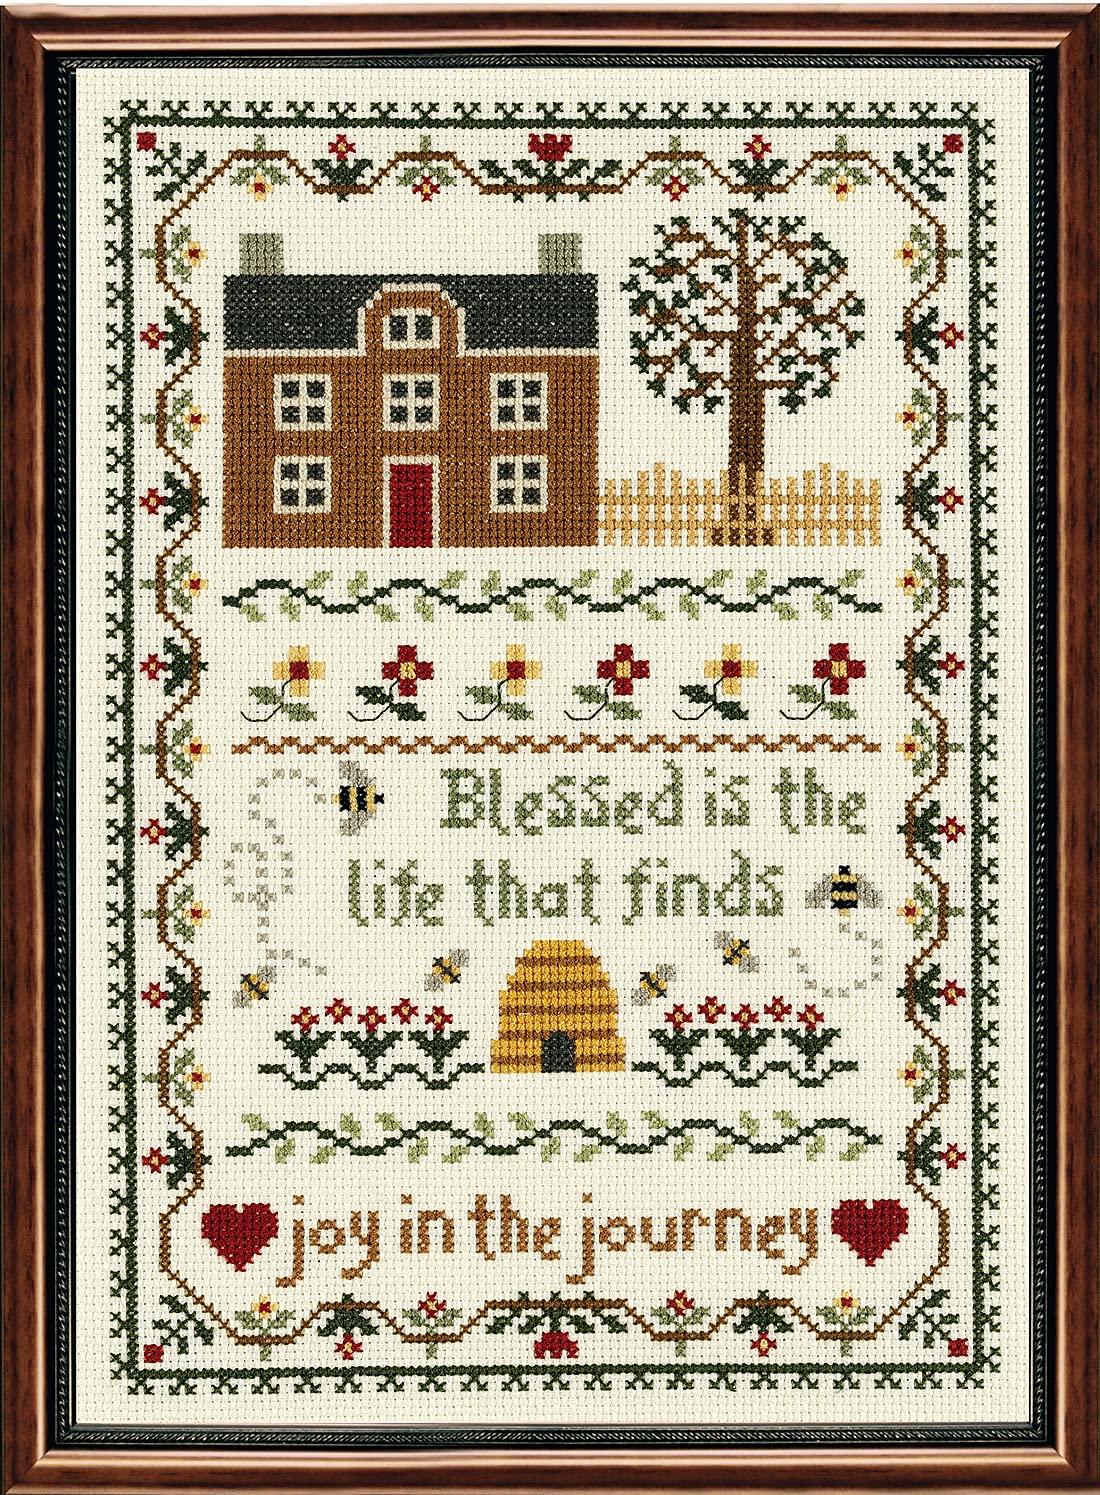 Janlynn 50222 Counted Cross Stitch Kit 7.75"X11.25", Joy In The Journey (14 Count), Blue